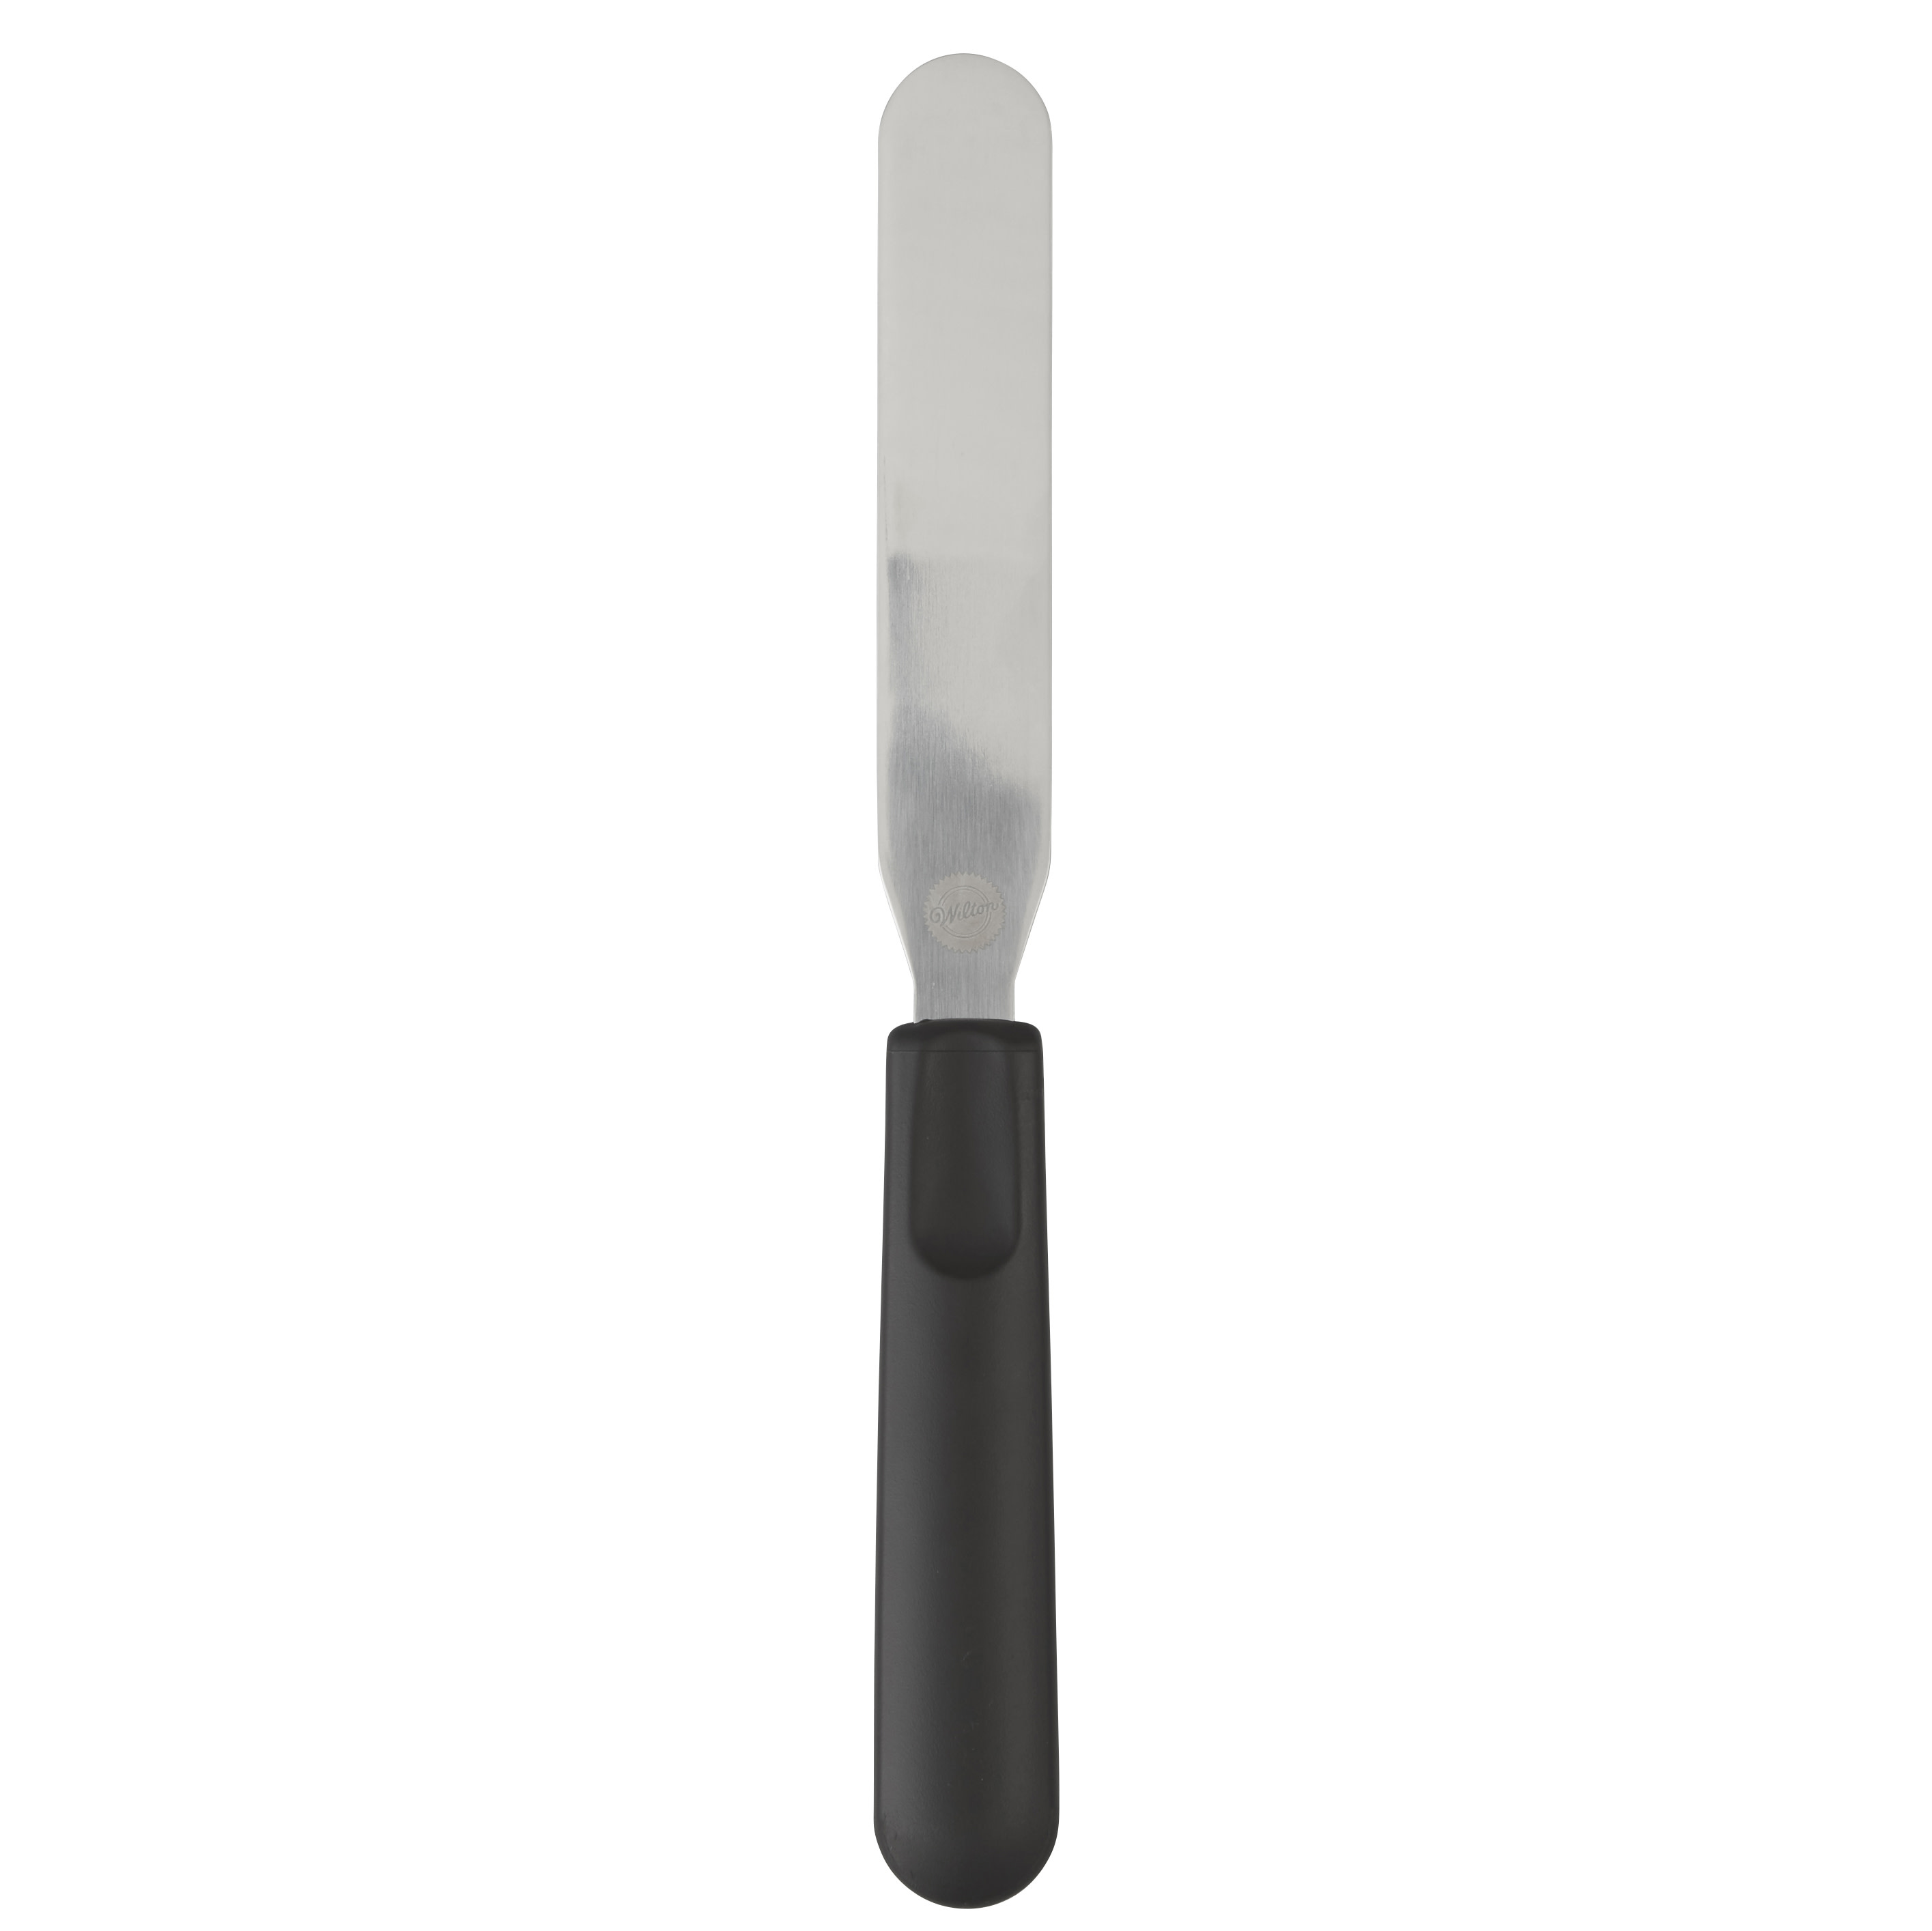 Wilton Straight Spatula, Stainless Steel Blade, Plastic Handle, 11 inch - image 1 of 7